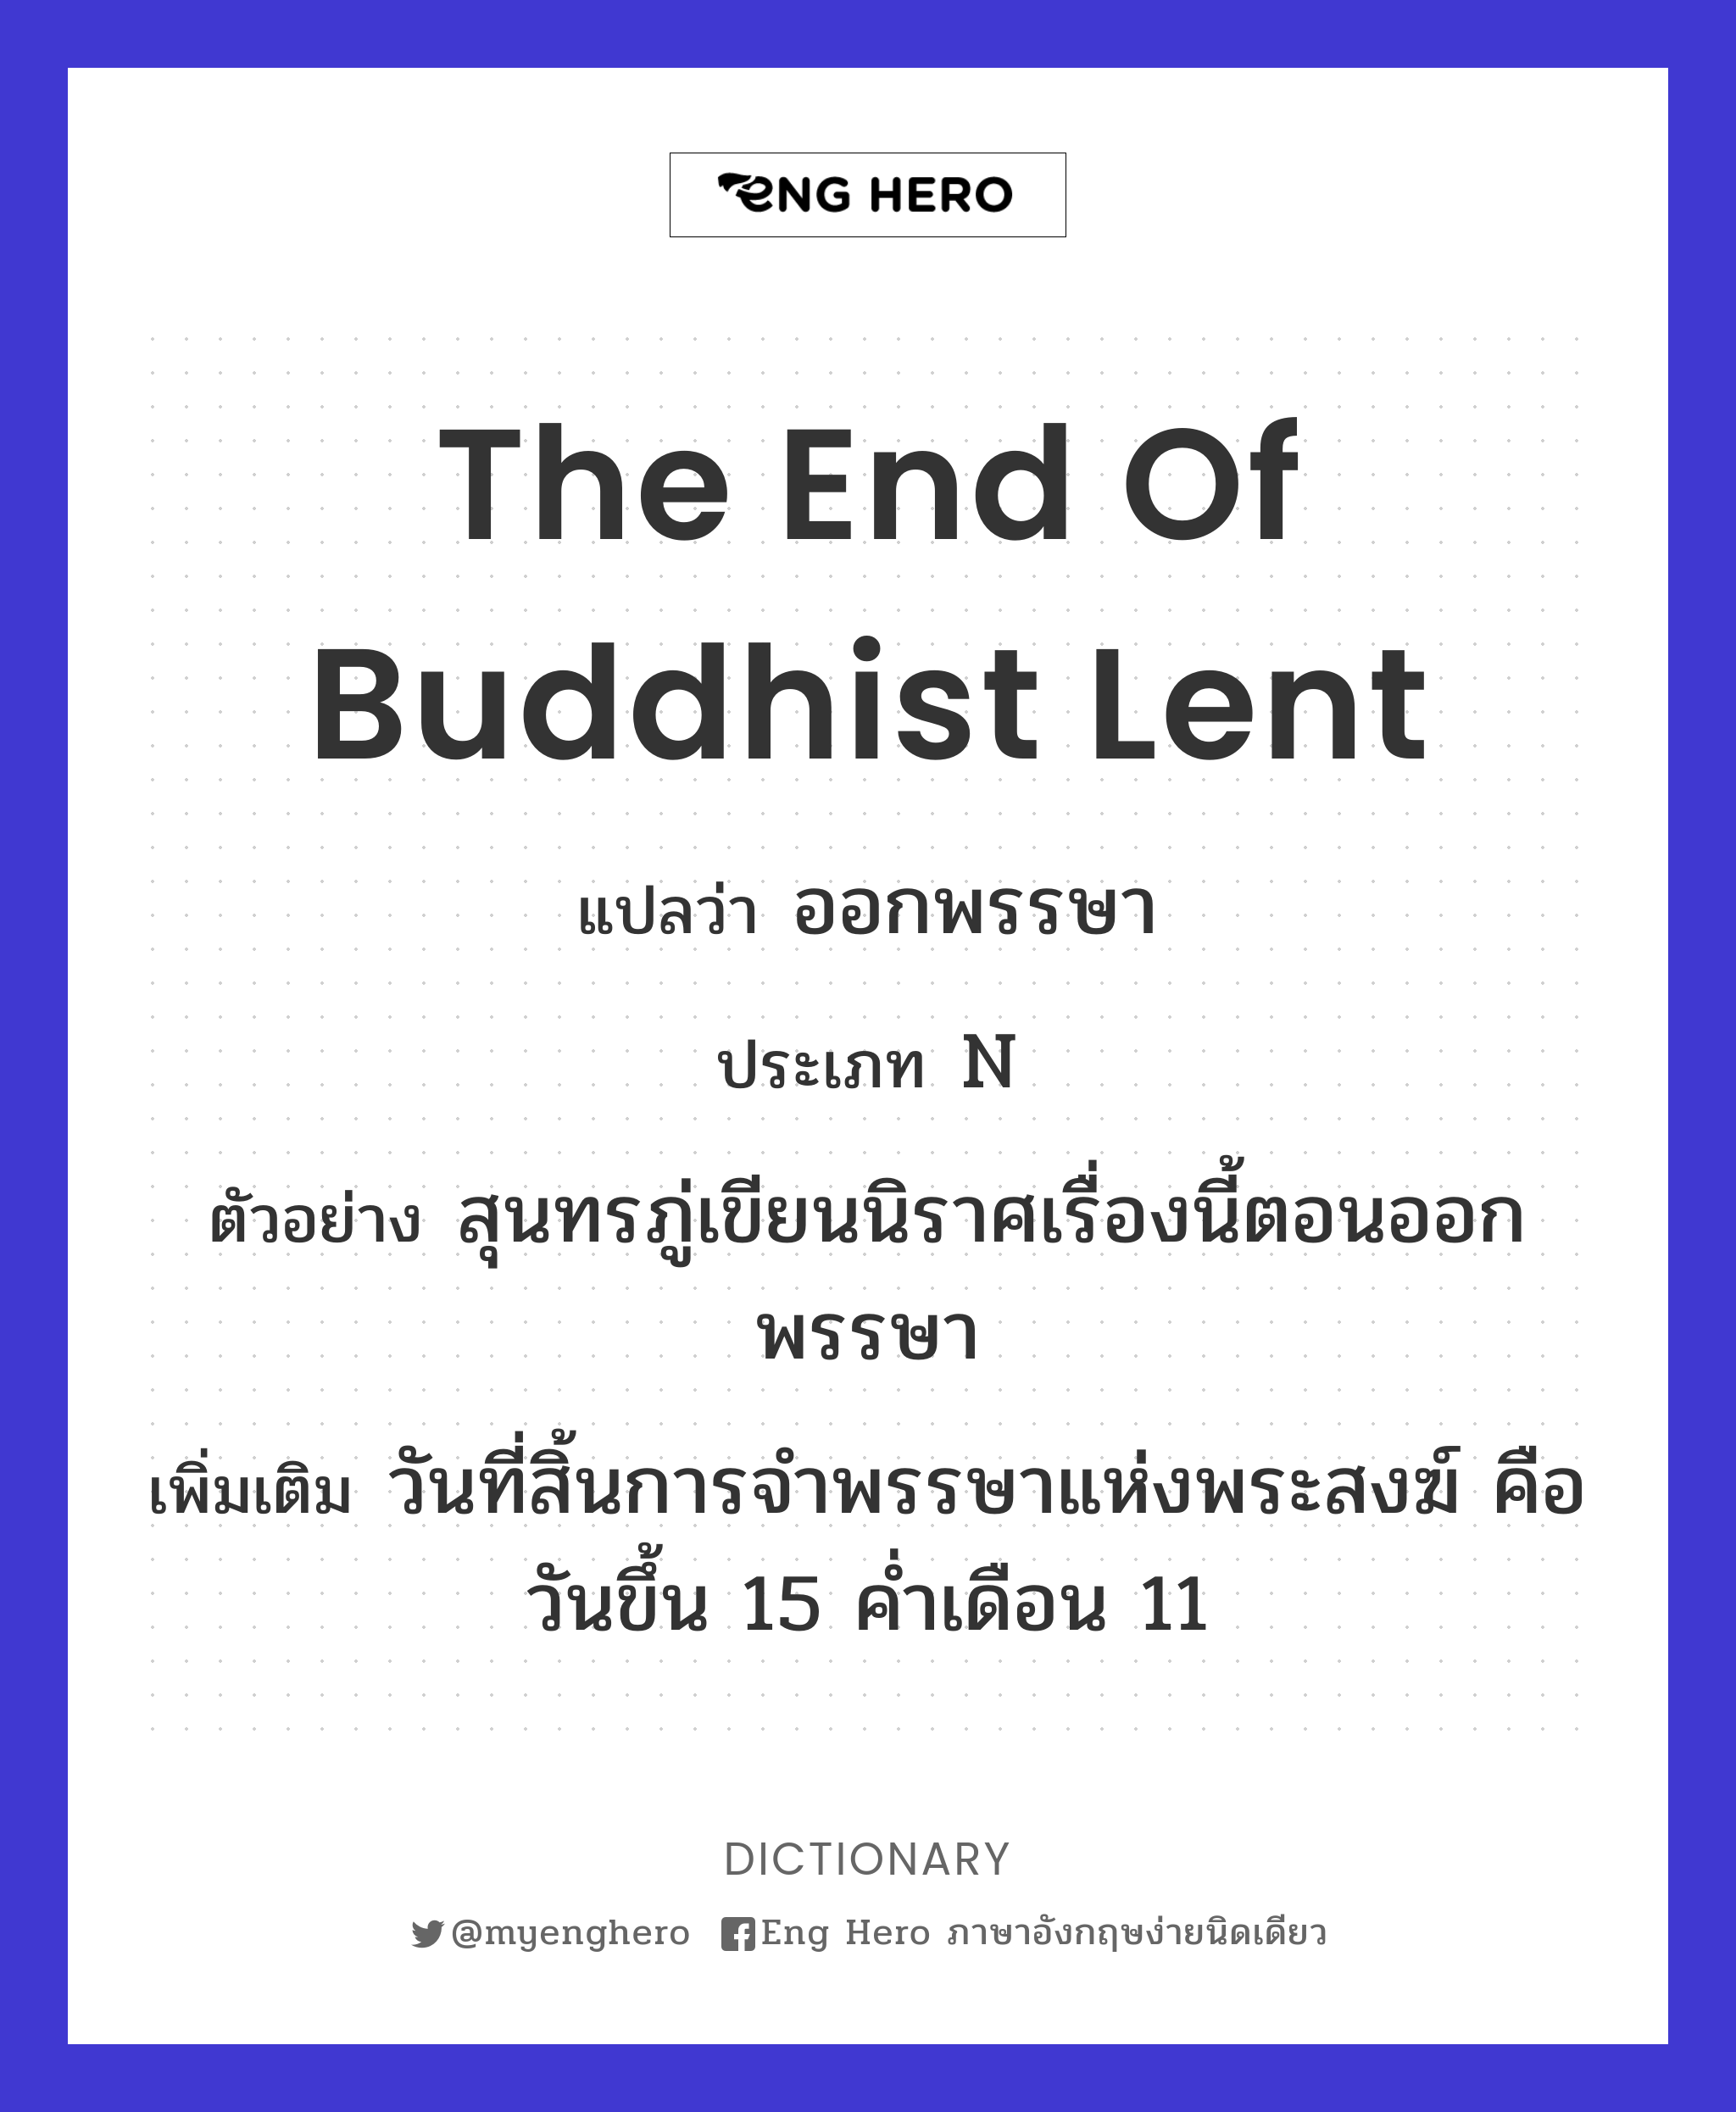 the end of Buddhist lent